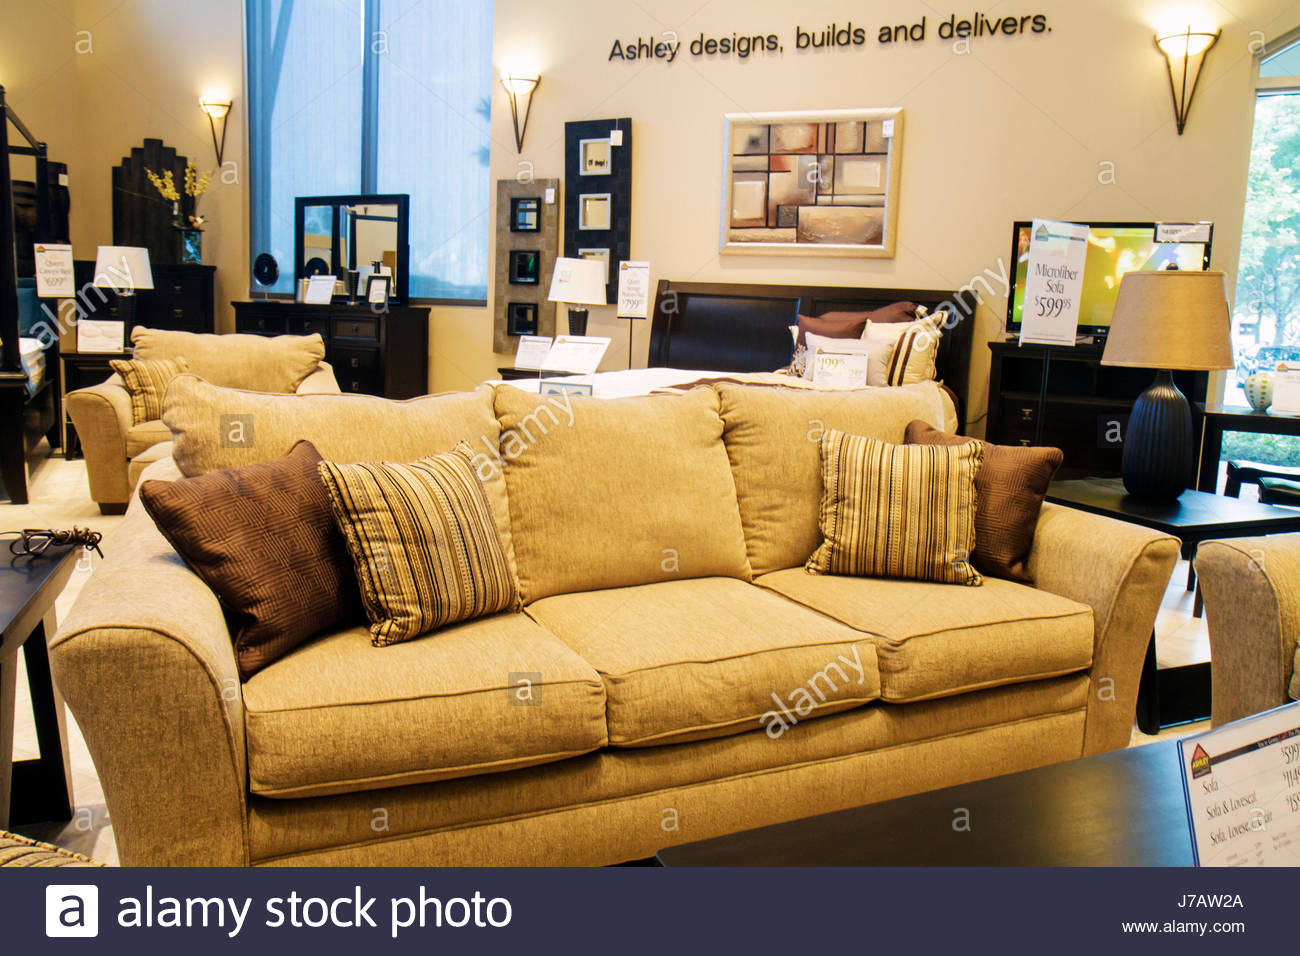 Furniture Stock Photos Furniture Stock Images Page 2 Alamy